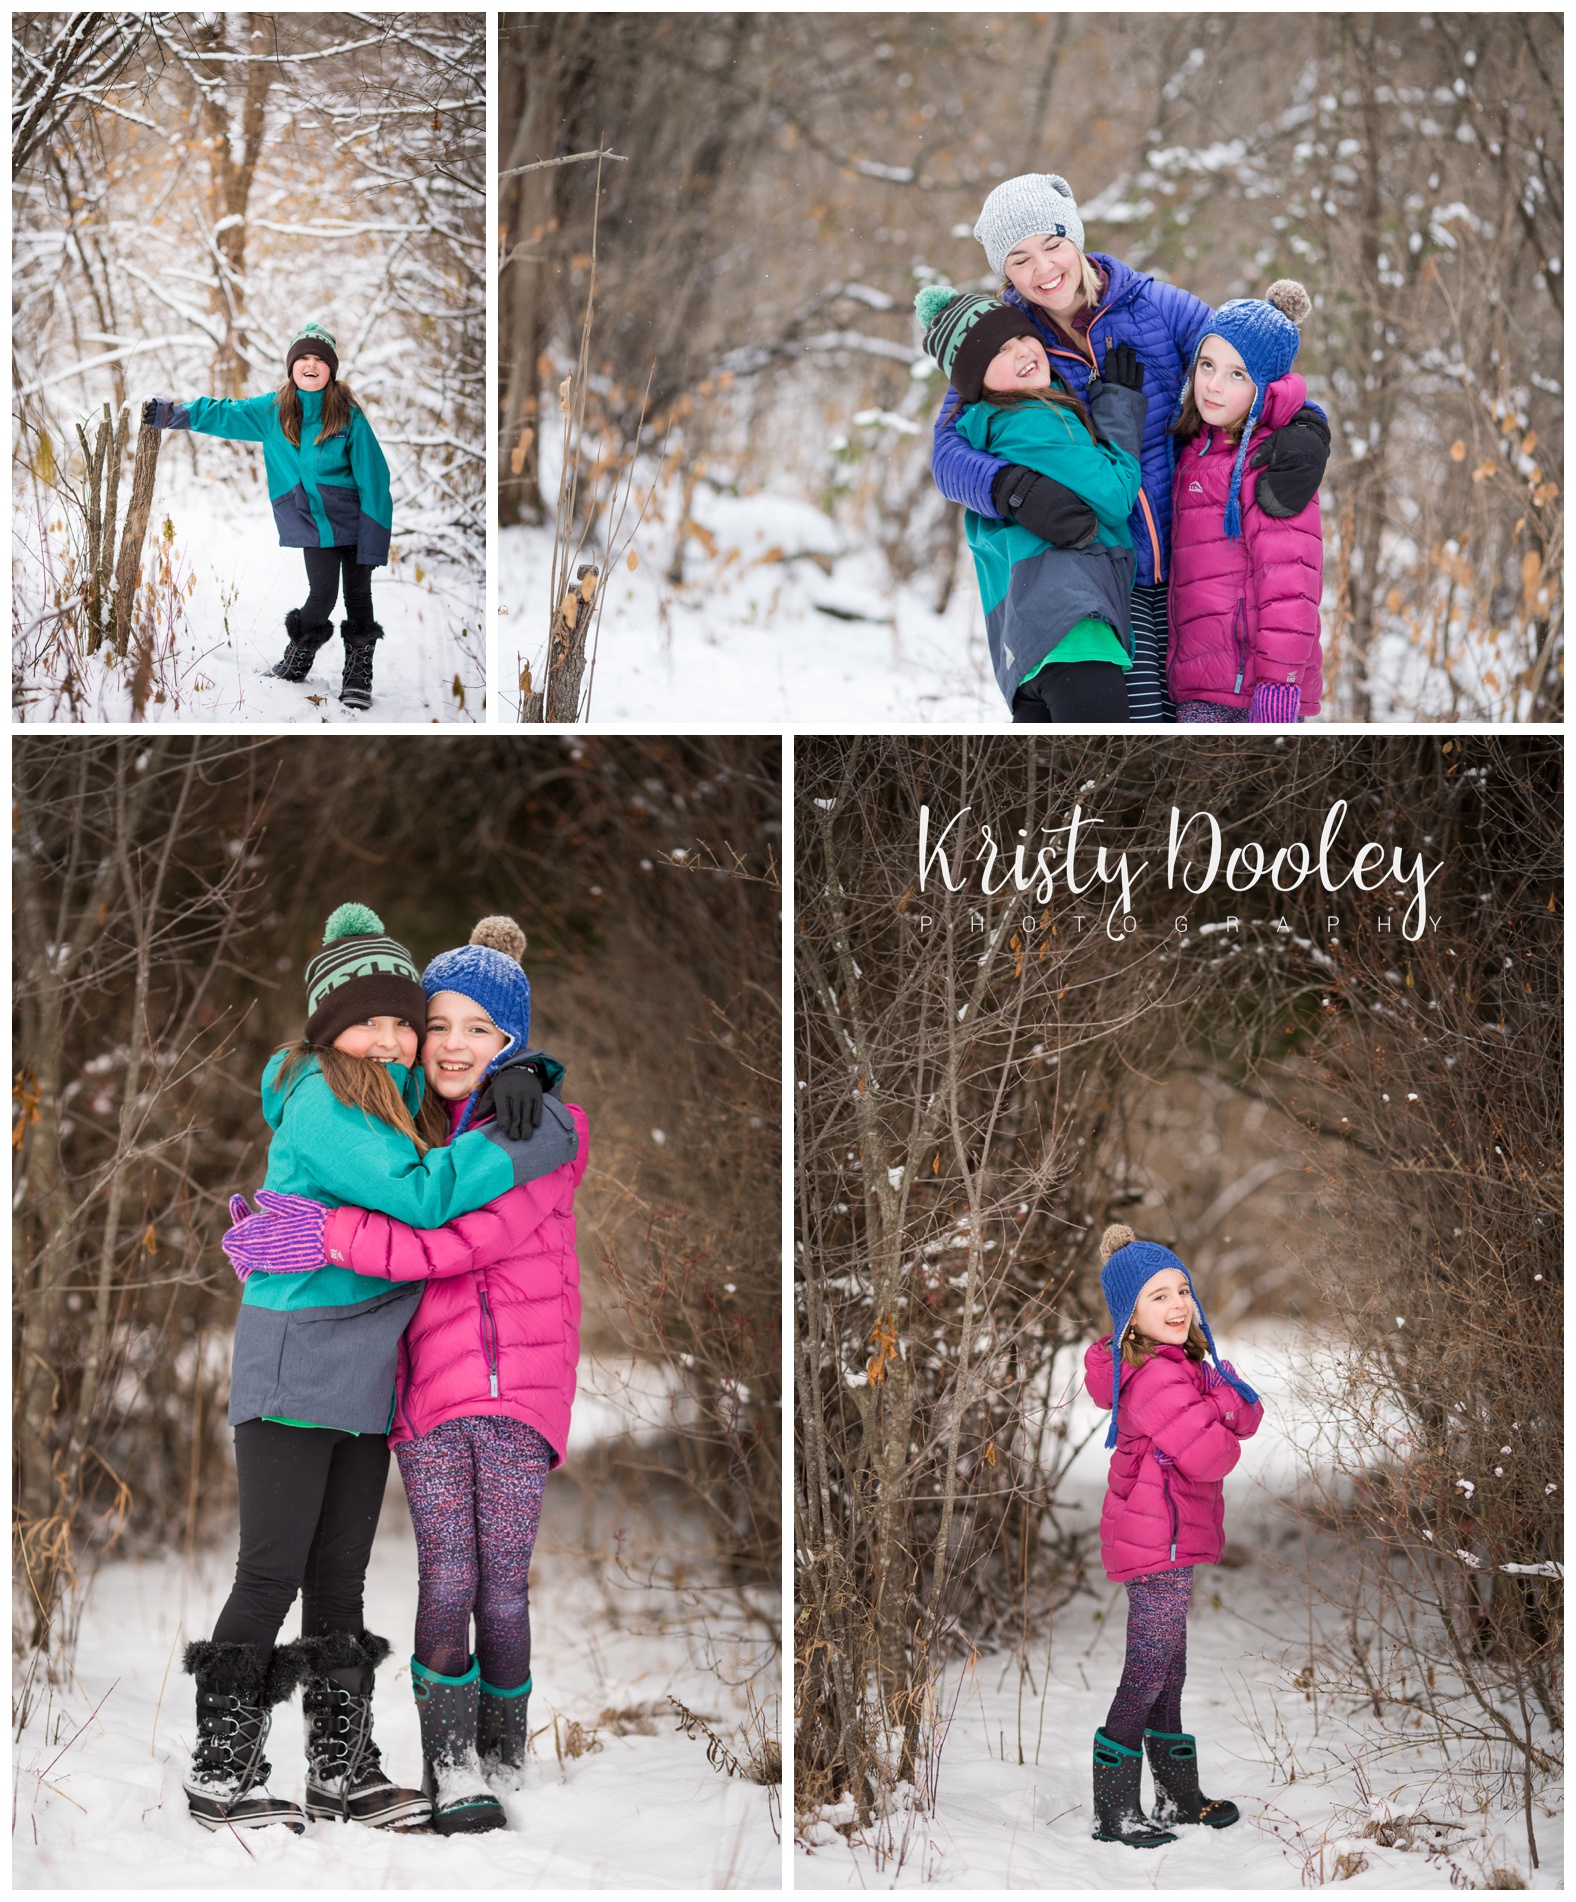 winter family photography by kristy dooley